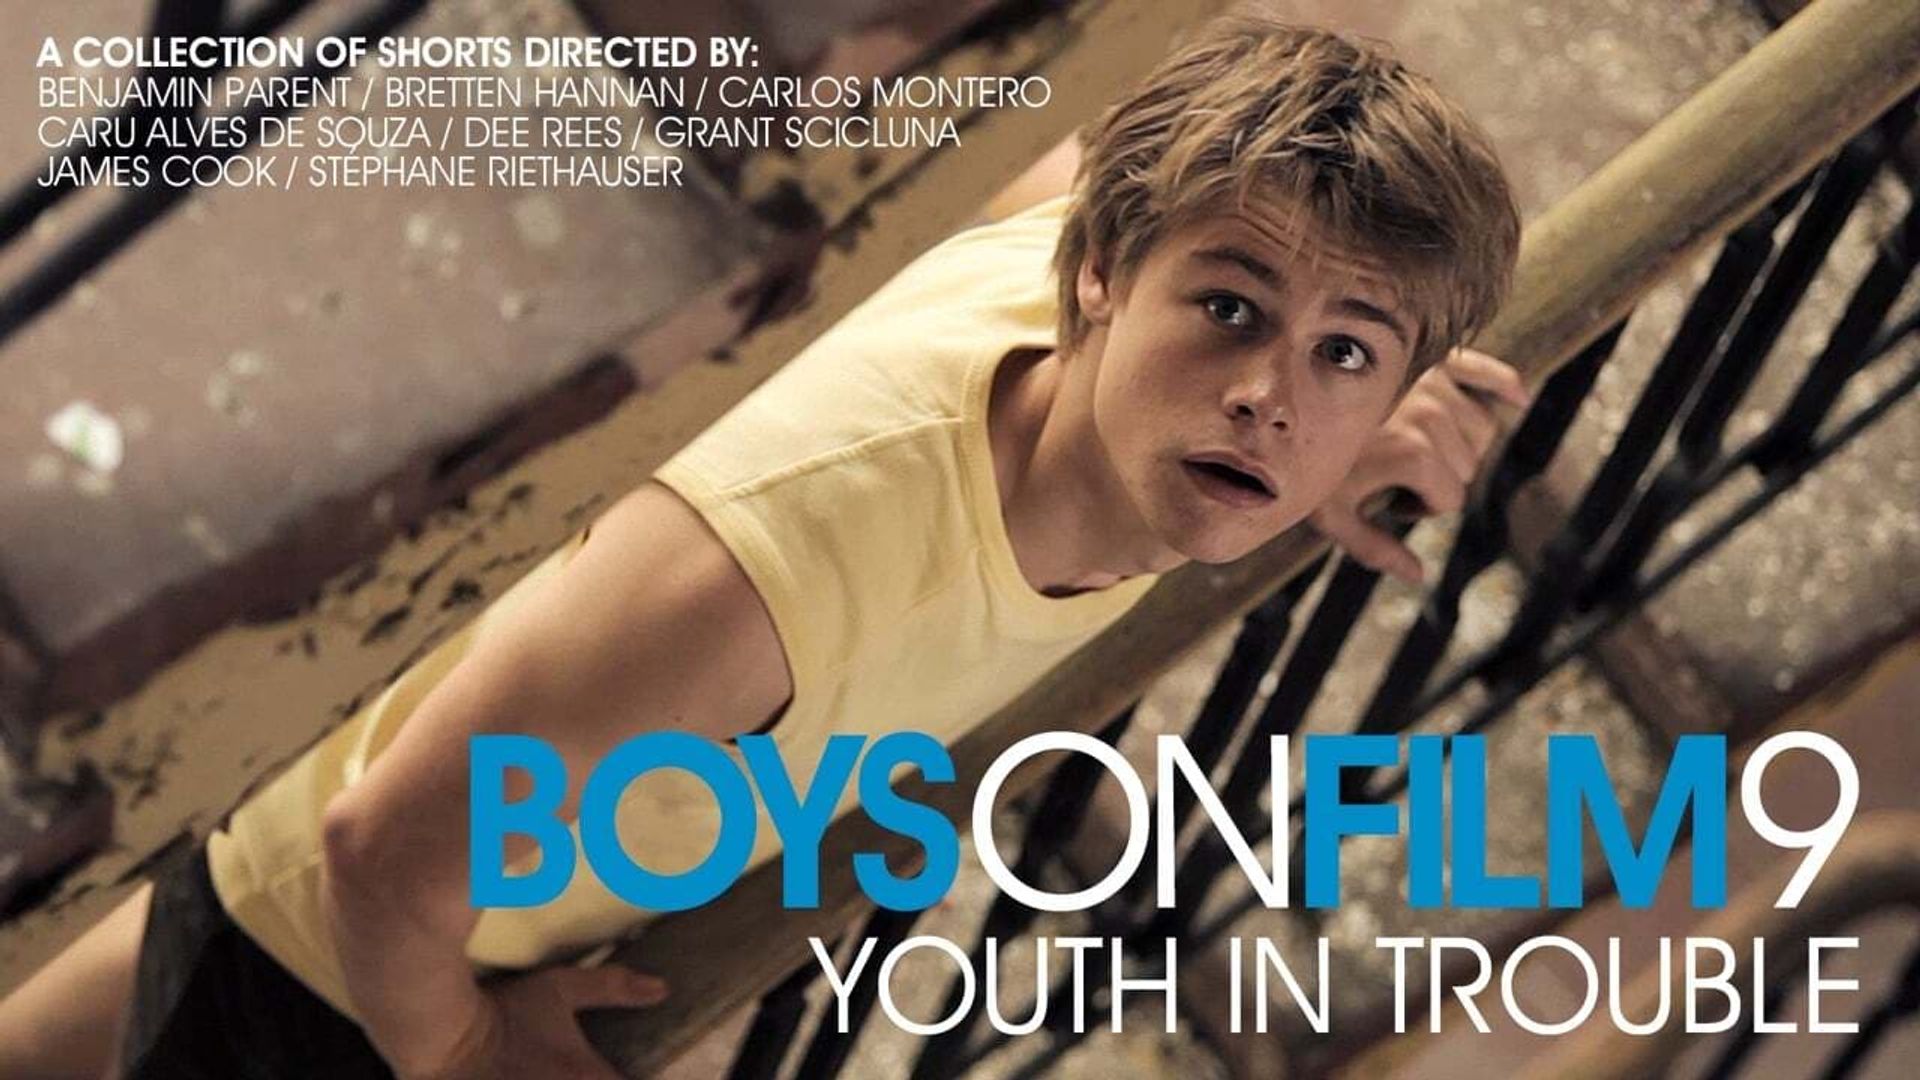 Boys on Film 9: Youth in Trouble background